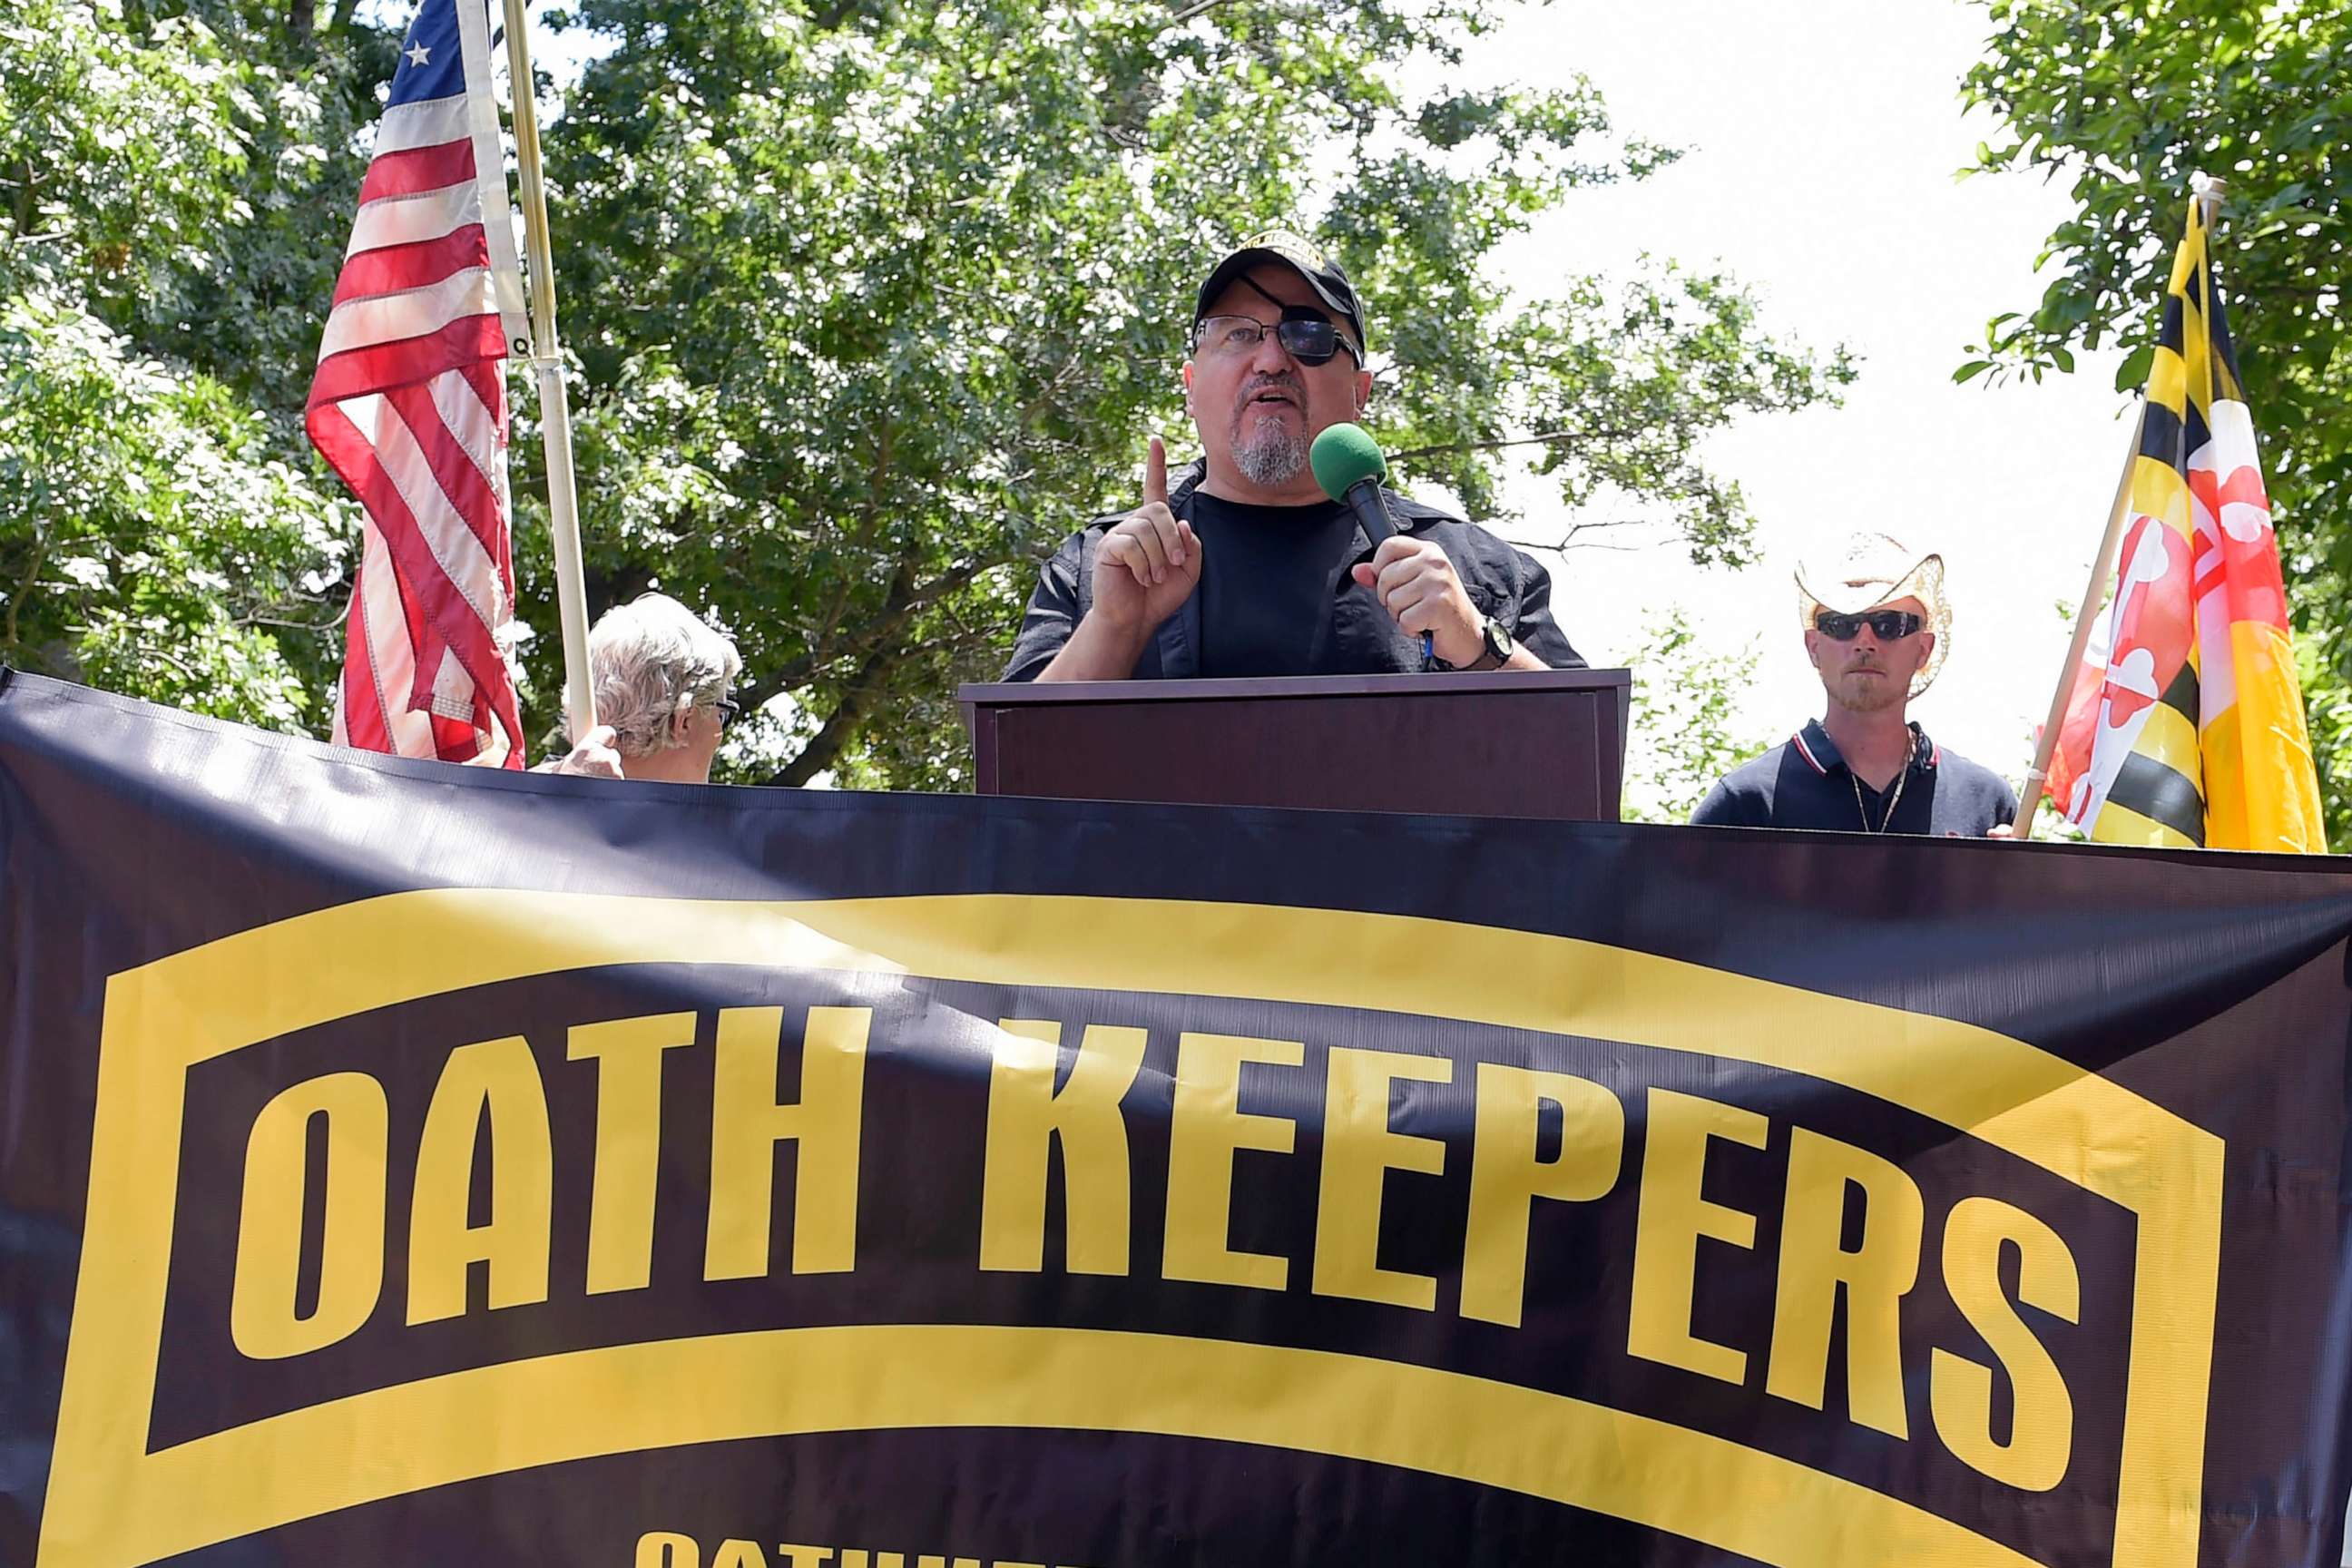 PHOTO: Stewart Rhodes, founder of the Oath Keepers, speaks during a rally outside the White House in Washington, D.C., June 25, 2017.